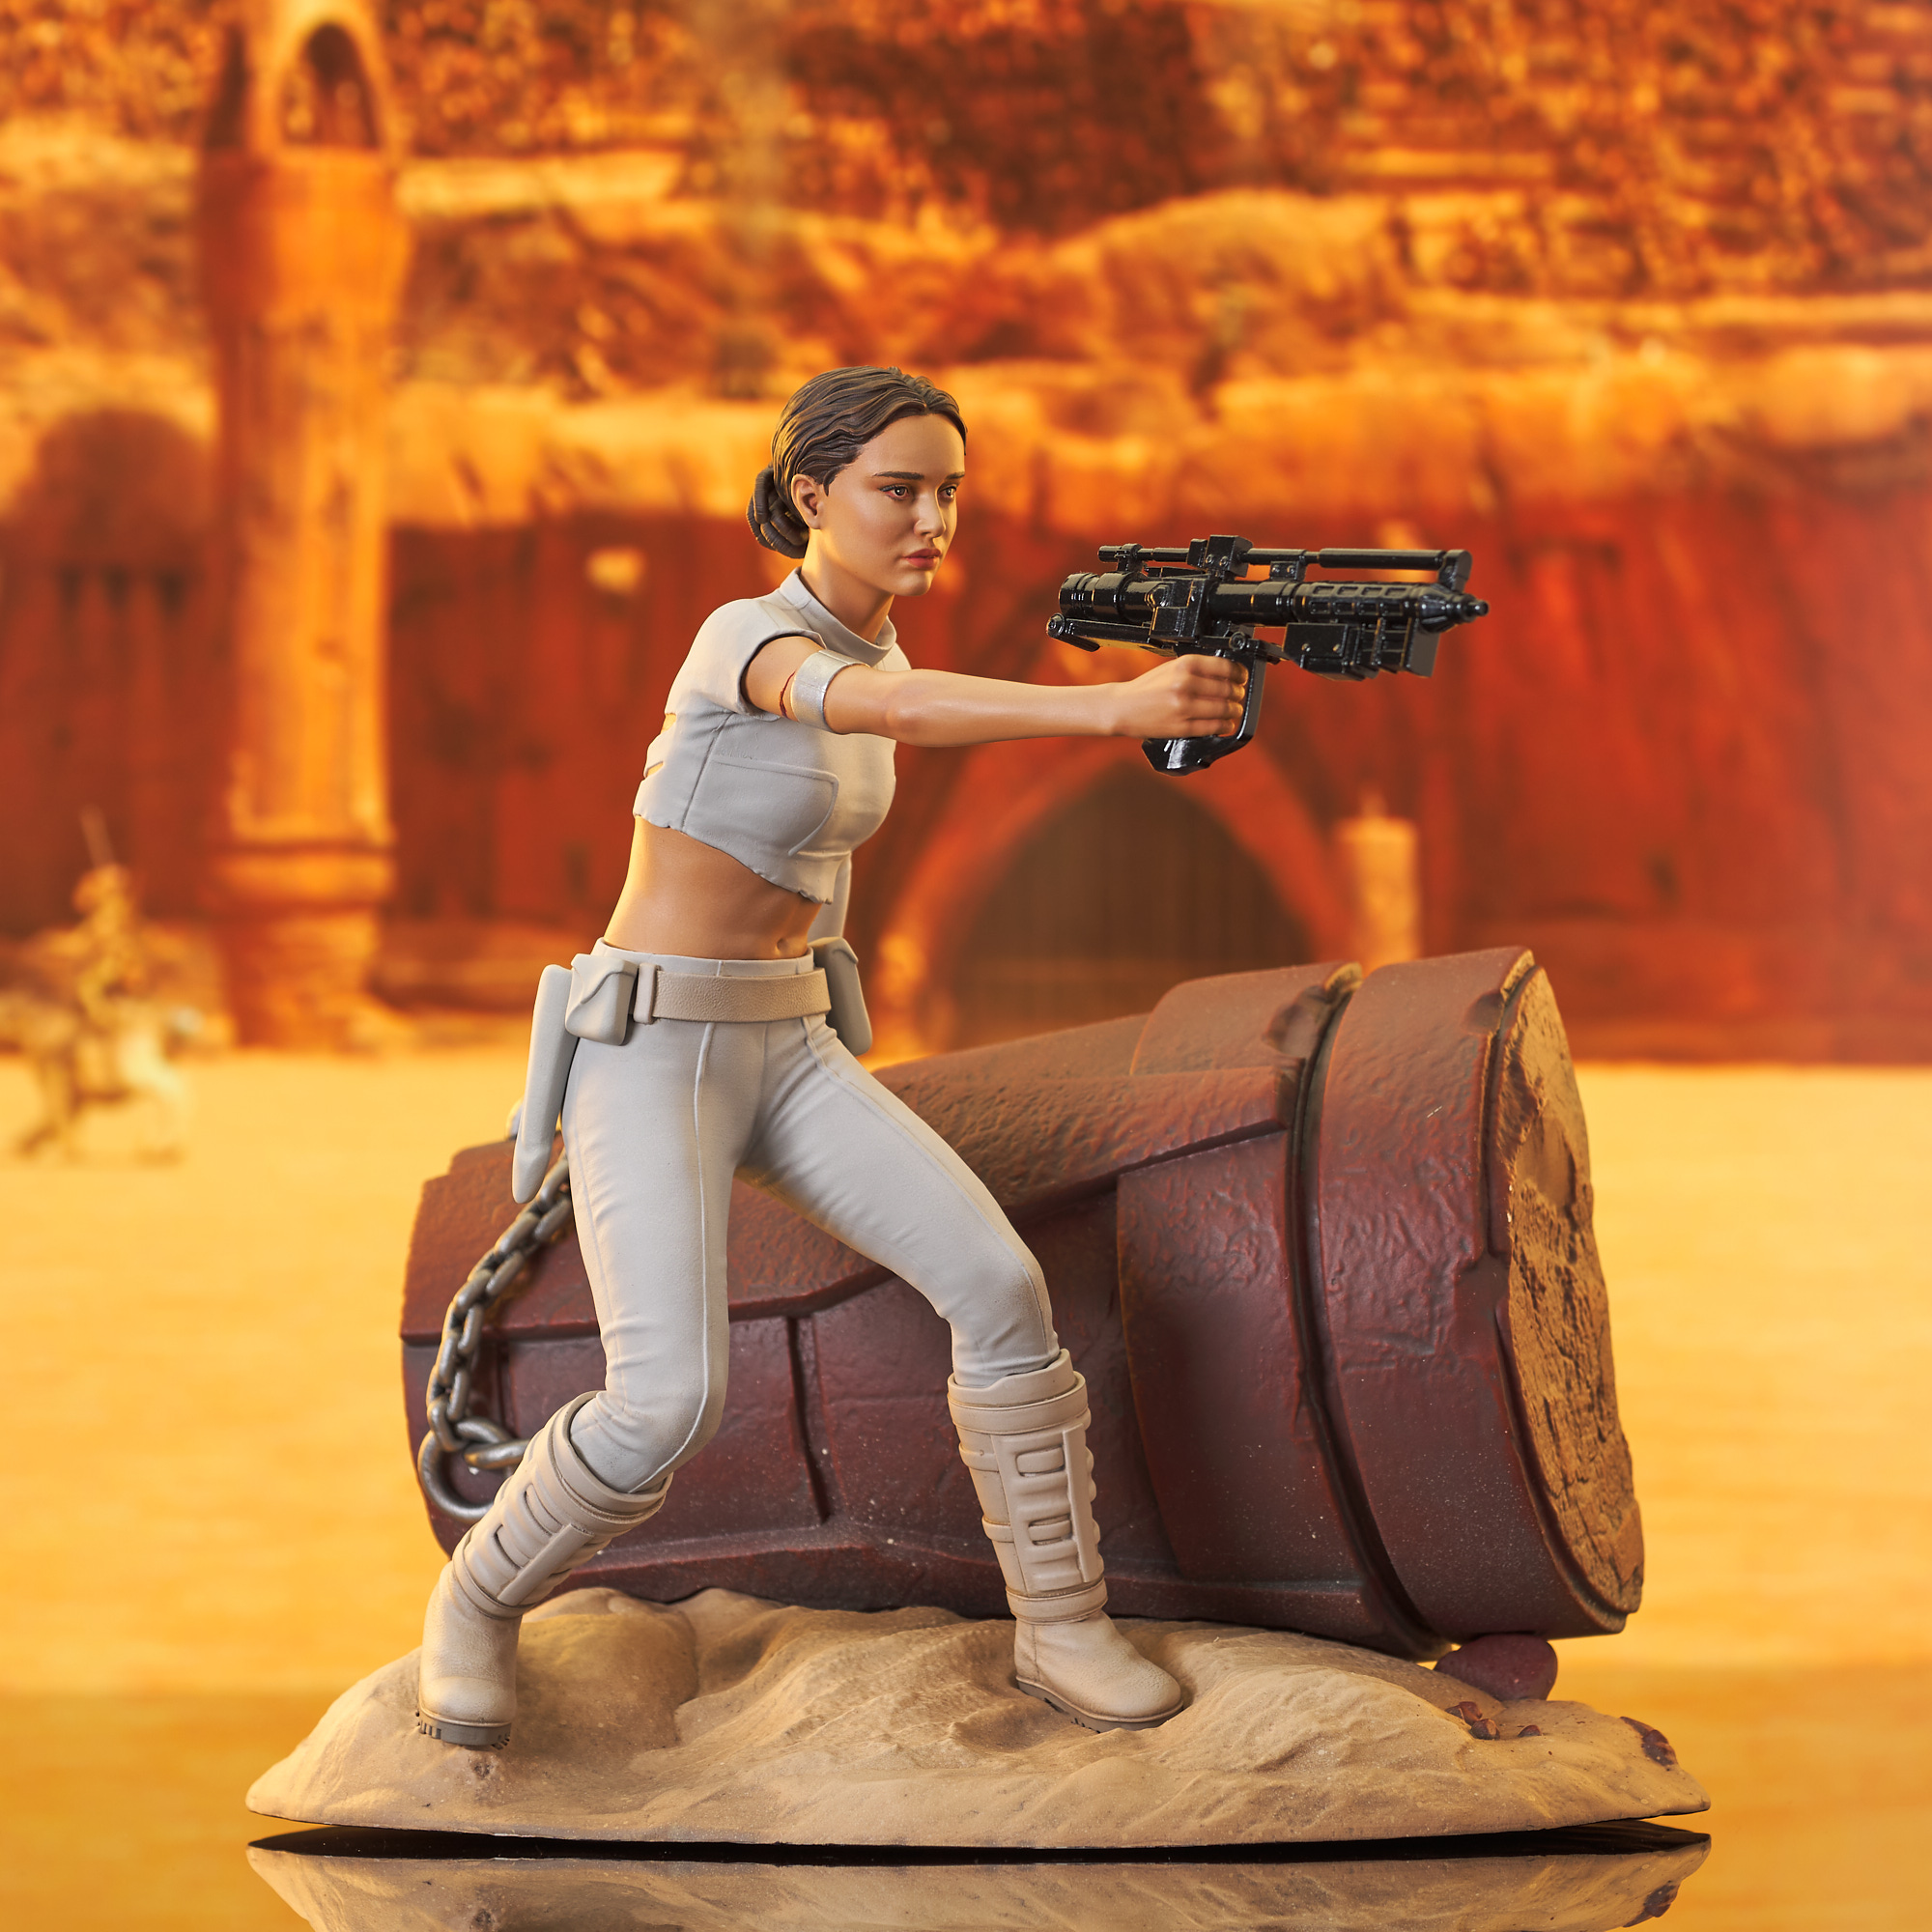 Best of Images of padme from star wars